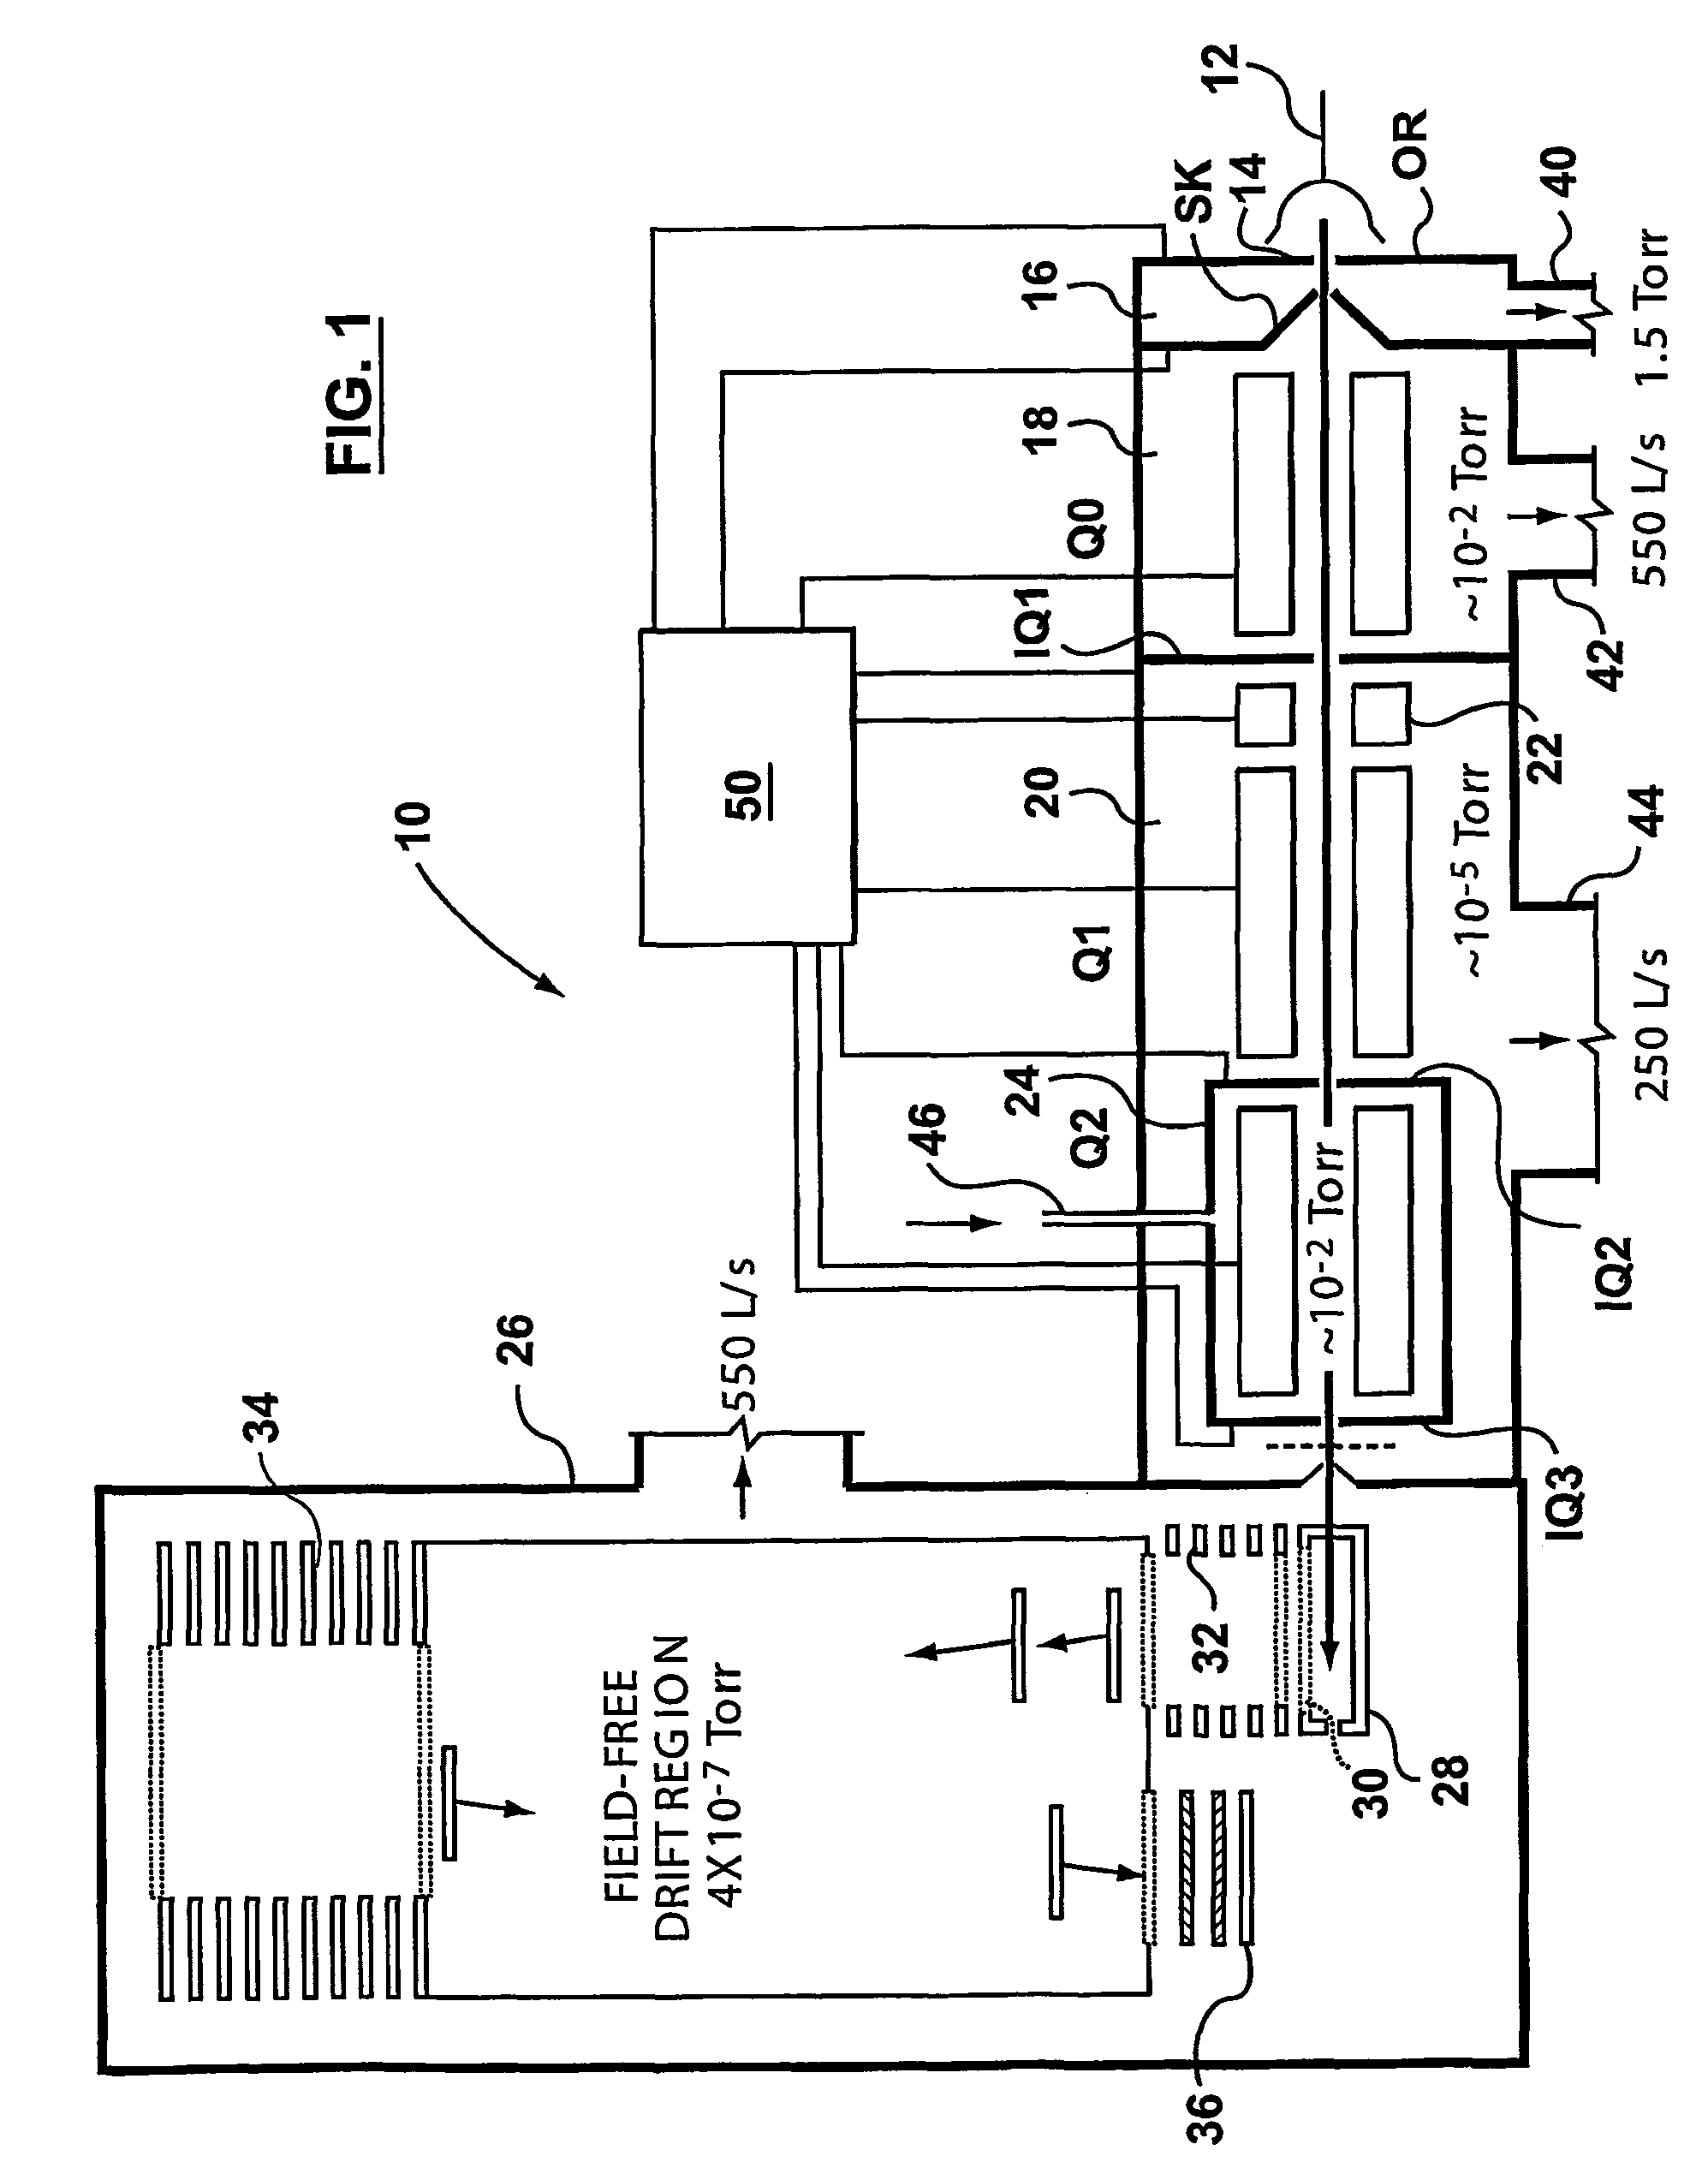 Apparatus and method for MSnth in a tandem mass spectrometer system